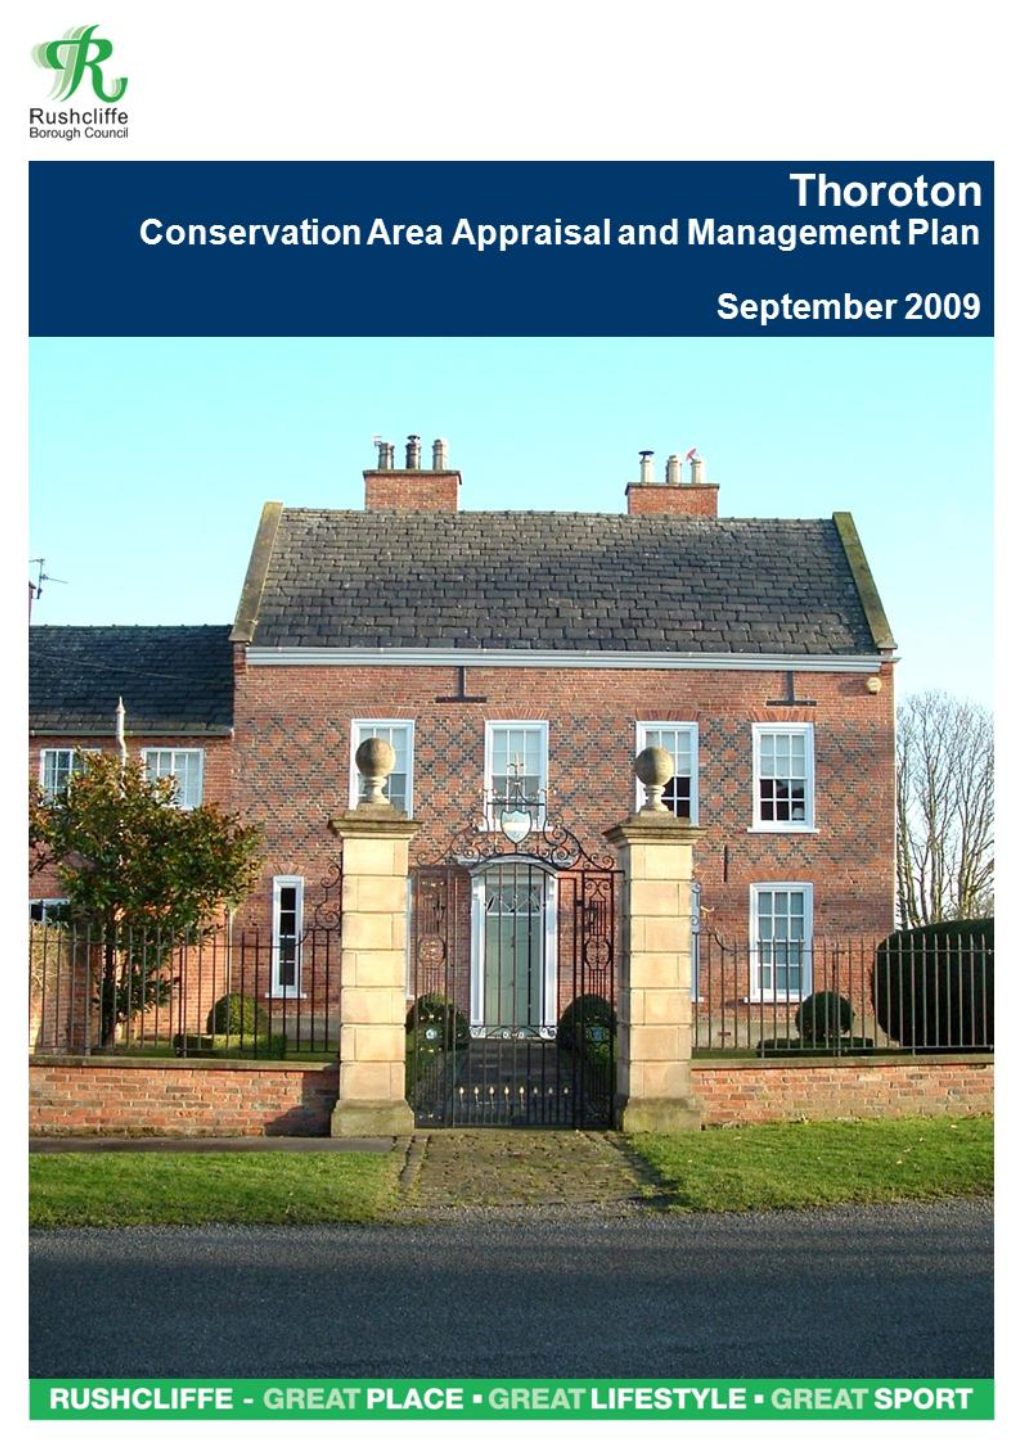 Thoroton Conservation Area Appraisal and Management Plan